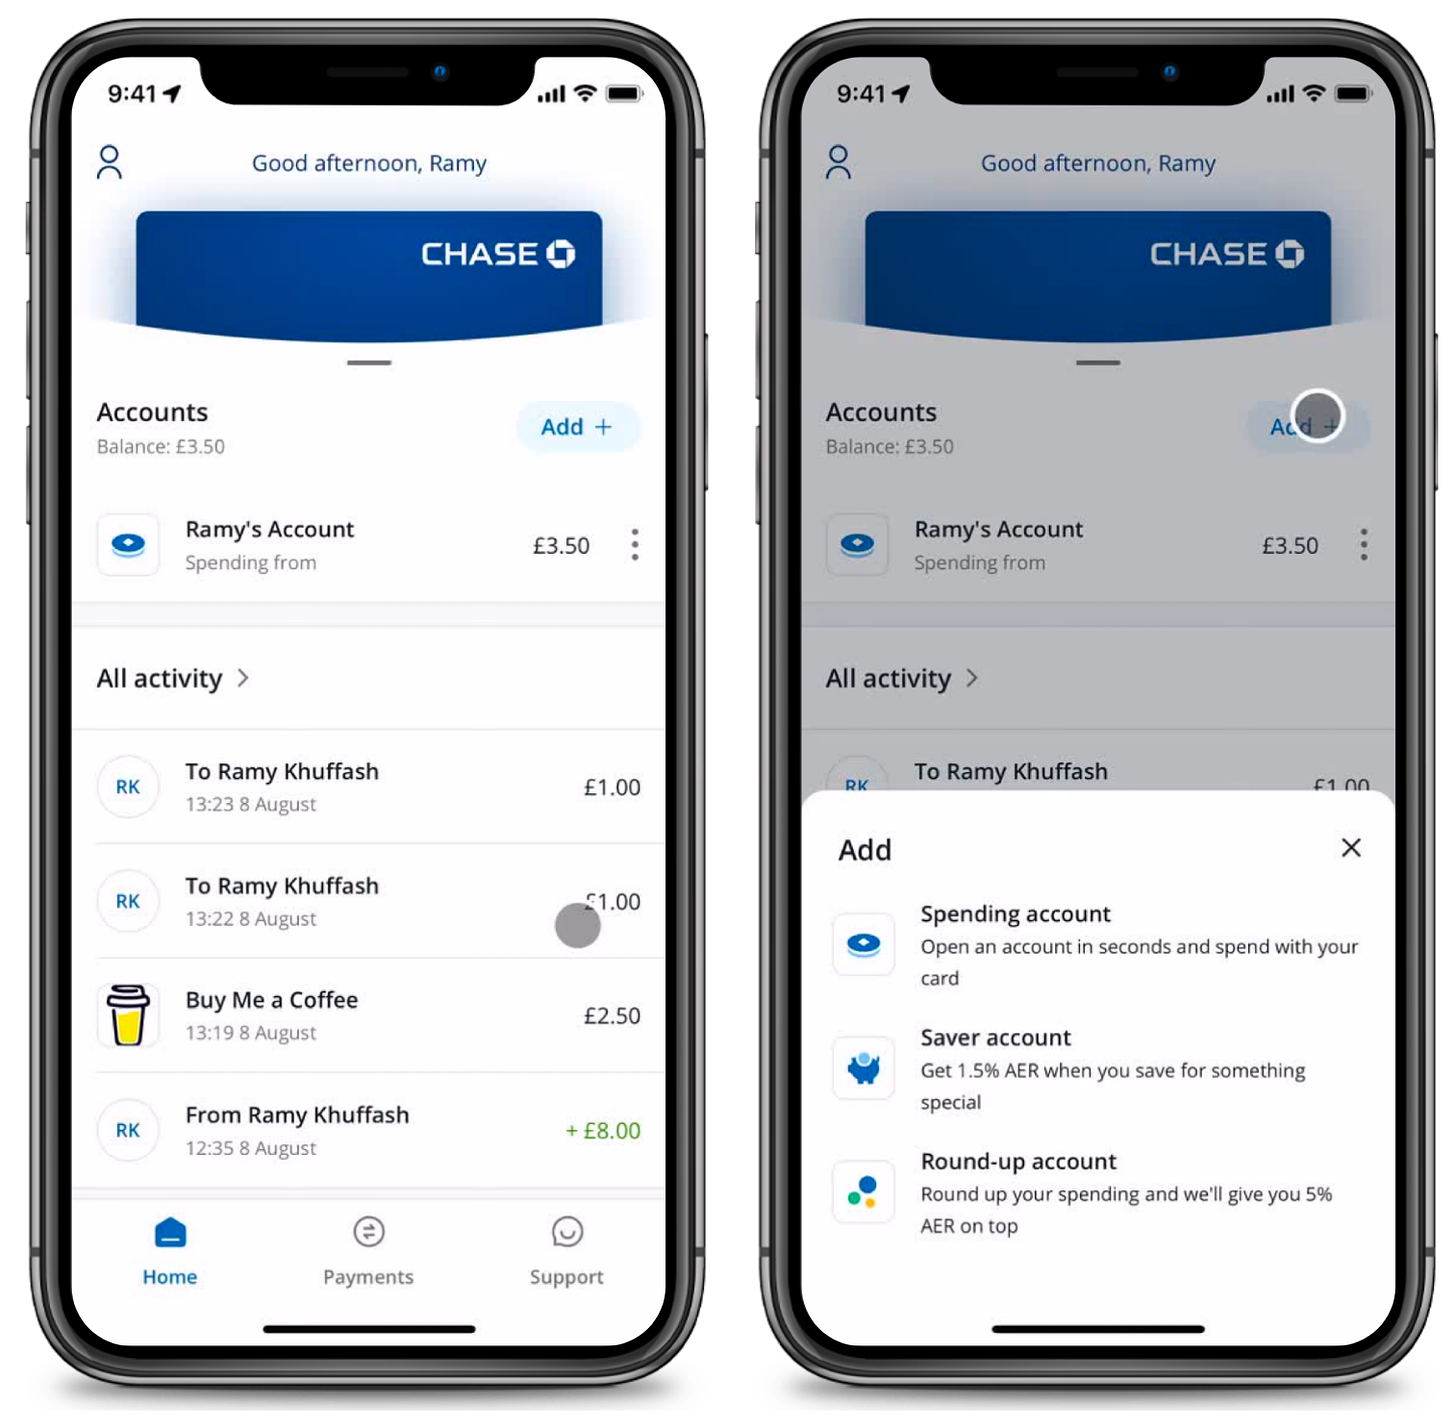 Screens of Chase app